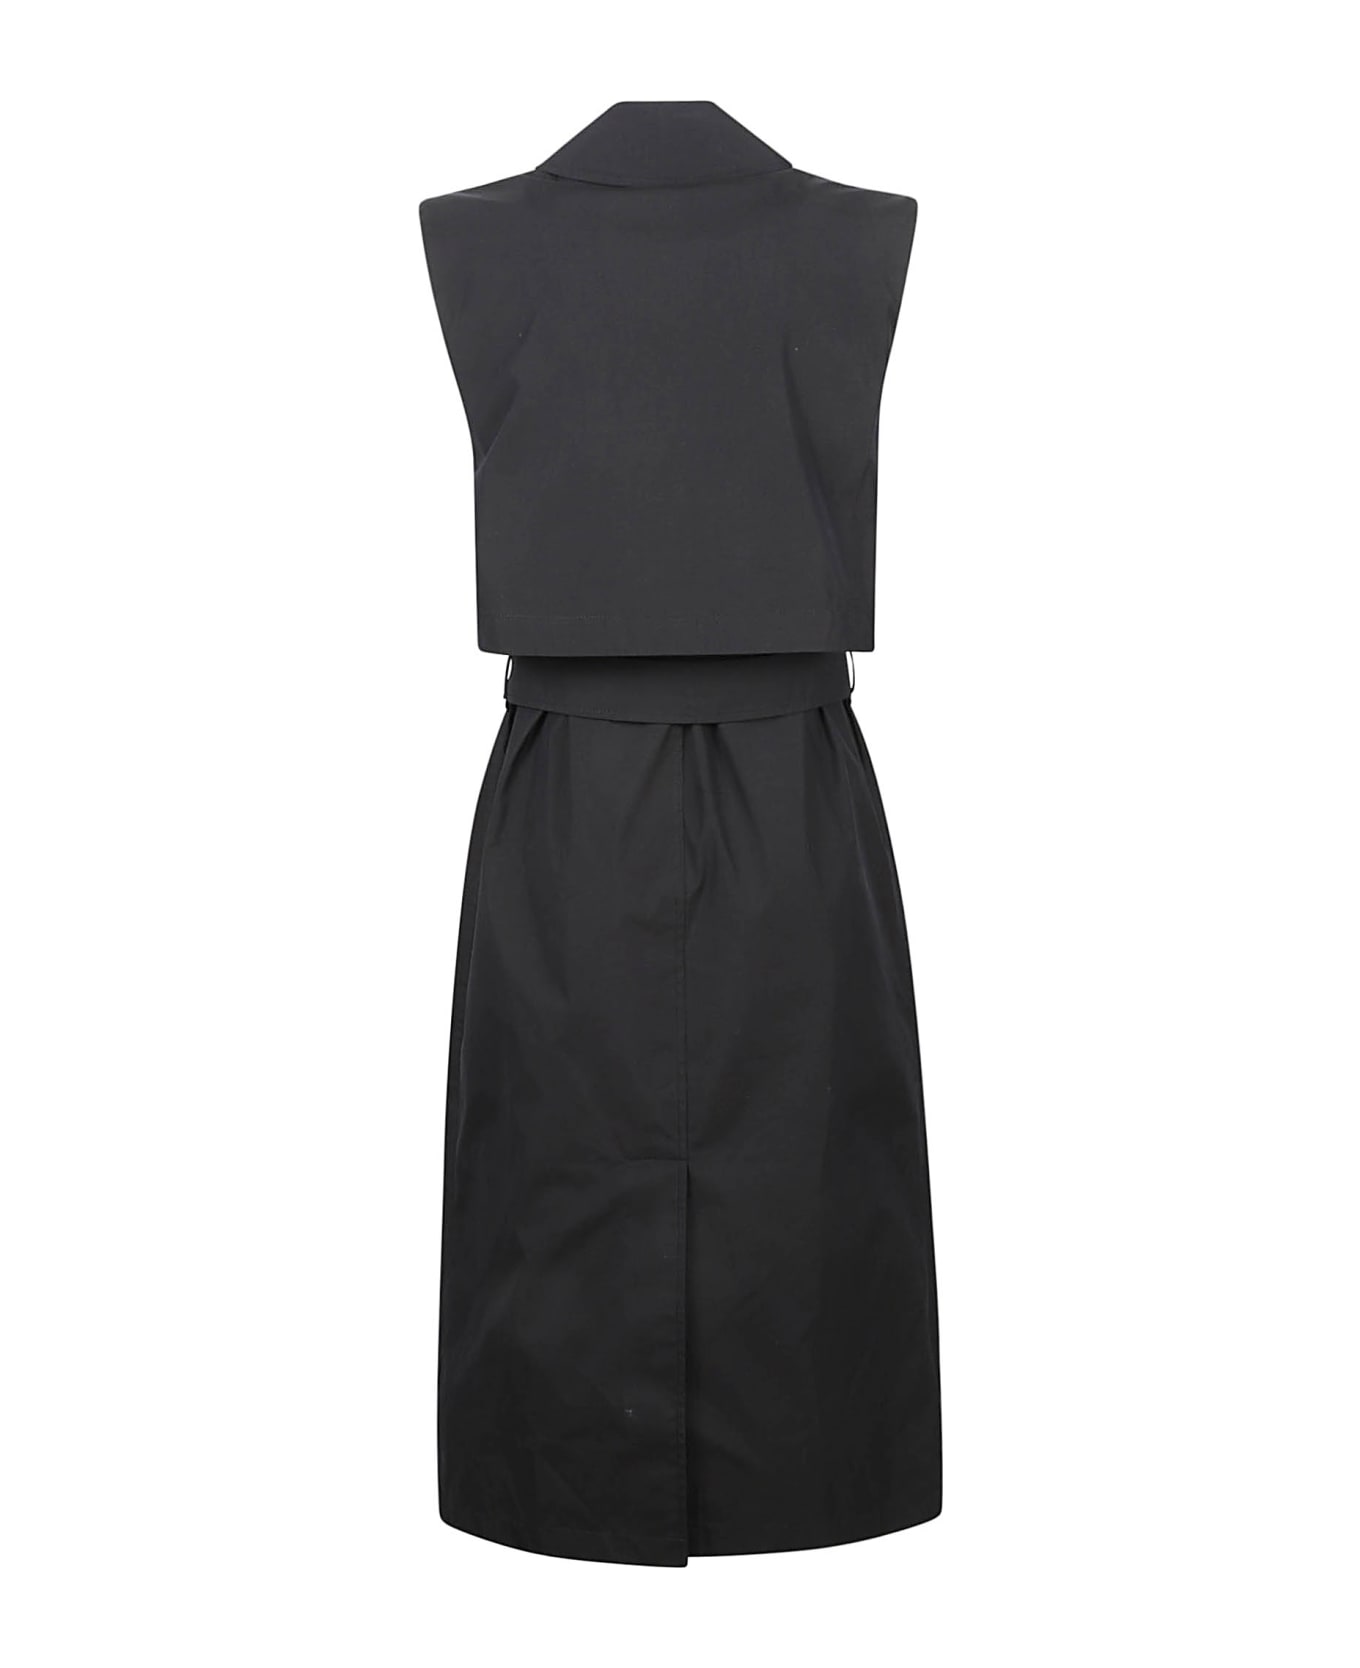 Burberry Double-breast Sleeveless Belted Dress - Black